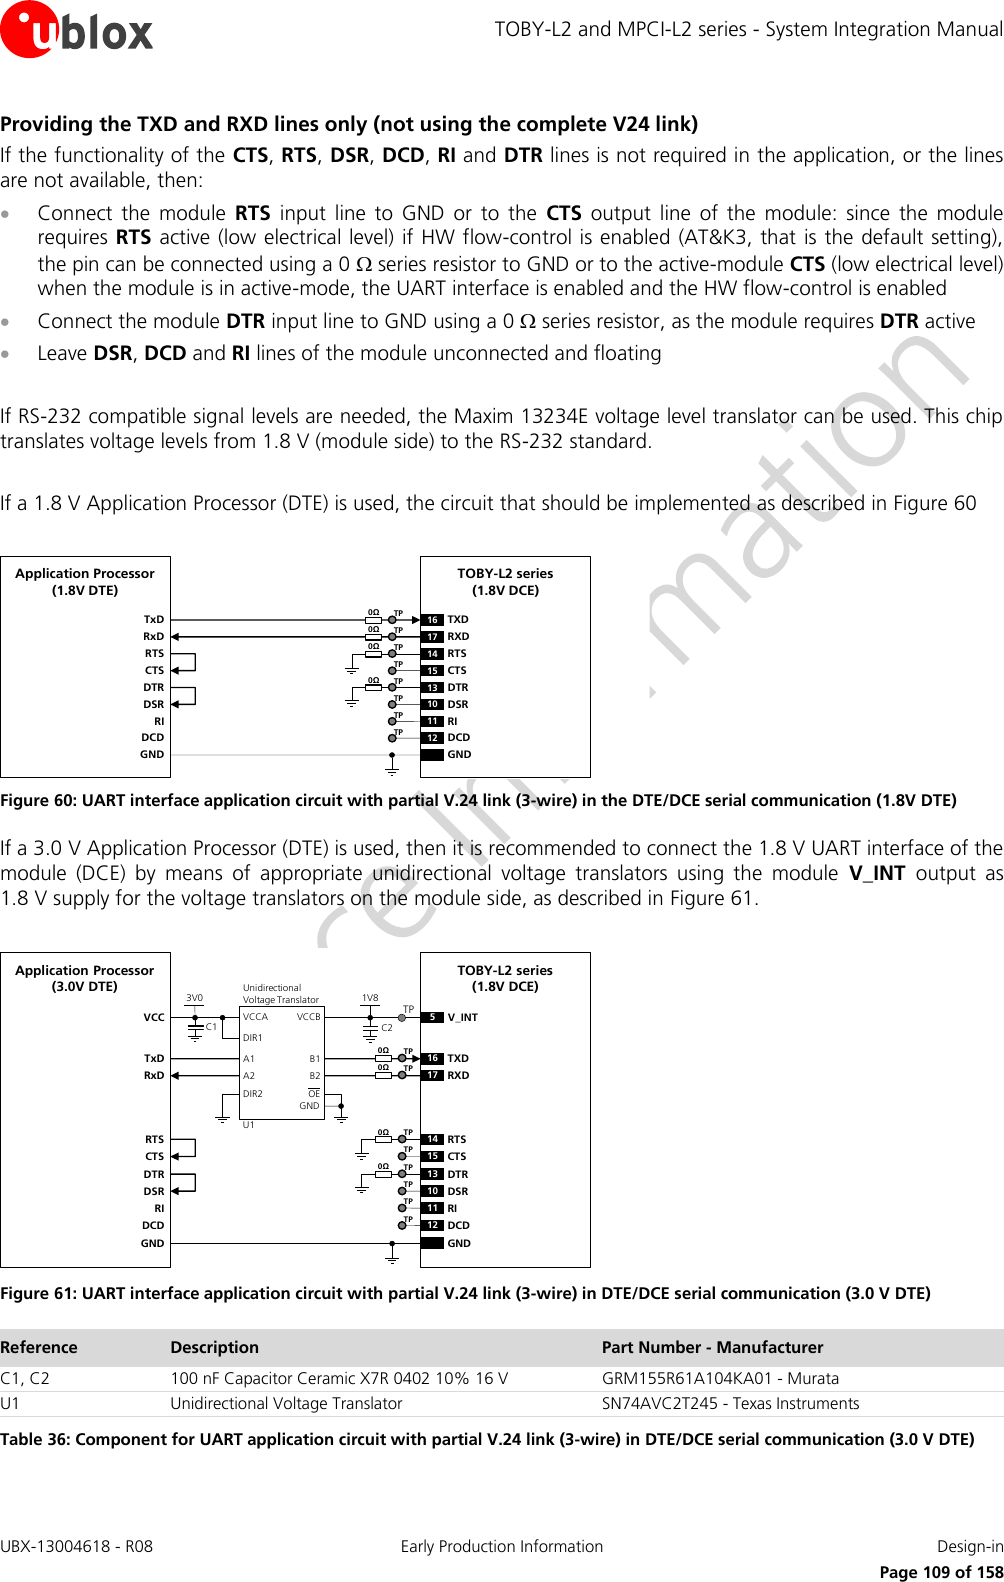 TOBY-L2 and MPCI-L2 series - System Integration Manual UBX-13004618 - R08  Early Production Information  Design-in     Page 109 of 158 Providing the TXD and RXD lines only (not using the complete V24 link) If the functionality of the CTS, RTS, DSR, DCD, RI and DTR lines is not required in the application, or the lines are not available, then:  Connect  the  module  RTS  input  line  to  GND  or  to  the  CTS  output  line  of  the  module:  since  the  module requires RTS active (low electrical level) if HW flow-control is enabled (AT&amp;K3, that is the default setting), the pin can be connected using a 0  series resistor to GND or to the active-module CTS (low electrical level) when the module is in active-mode, the UART interface is enabled and the HW flow-control is enabled  Connect the module DTR input line to GND using a 0  series resistor, as the module requires DTR active  Leave DSR, DCD and RI lines of the module unconnected and floating  If RS-232 compatible signal levels are needed, the Maxim 13234E voltage level translator can be used. This chip translates voltage levels from 1.8 V (module side) to the RS-232 standard.   If a 1.8 V Application Processor (DTE) is used, the circuit that should be implemented as described in Figure 60  TxDApplication Processor(1.8V DTE)RxDRTSCTSDTRDSRRIDCDGNDTOBY-L2 series (1.8V DCE)16 TXD13 DTR17 RXD14 RTS15 CTS10 DSR11 RI12 DCDGND0ΩTP0ΩTP0ΩTPTP0ΩTPTPTPTP Figure 60: UART interface application circuit with partial V.24 link (3-wire) in the DTE/DCE serial communication (1.8V DTE) If a 3.0 V Application Processor (DTE) is used, then it is recommended to connect the 1.8 V UART interface of the module  (DCE)  by  means  of  appropriate  unidirectional  voltage  translators  using  the  module  V_INT  output  as 1.8 V supply for the voltage translators on the module side, as described in Figure 61.  5V_INTTxDApplication Processor(3.0V DTE)RxDDTRDSRRIDCDGNDTOBY-L2 series (1.8V DCE)16 TXD13 DTR17 RXD10 DSR11 RI12 DCDGND1V8B1 A1GNDU1VCCBVCCAUnidirectionalVoltage TranslatorC1 C23V0DIR1DIR2 OEVCCB2 A2RTSCTS14 RTS15 CTSTP0ΩTP0ΩTP0ΩTPTP0ΩTPTPTPTP Figure 61: UART interface application circuit with partial V.24 link (3-wire) in DTE/DCE serial communication (3.0 V DTE) Reference Description Part Number - Manufacturer C1, C2 100 nF Capacitor Ceramic X7R 0402 10% 16 V GRM155R61A104KA01 - Murata U1 Unidirectional Voltage Translator SN74AVC2T245 - Texas Instruments Table 36: Component for UART application circuit with partial V.24 link (3-wire) in DTE/DCE serial communication (3.0 V DTE) 